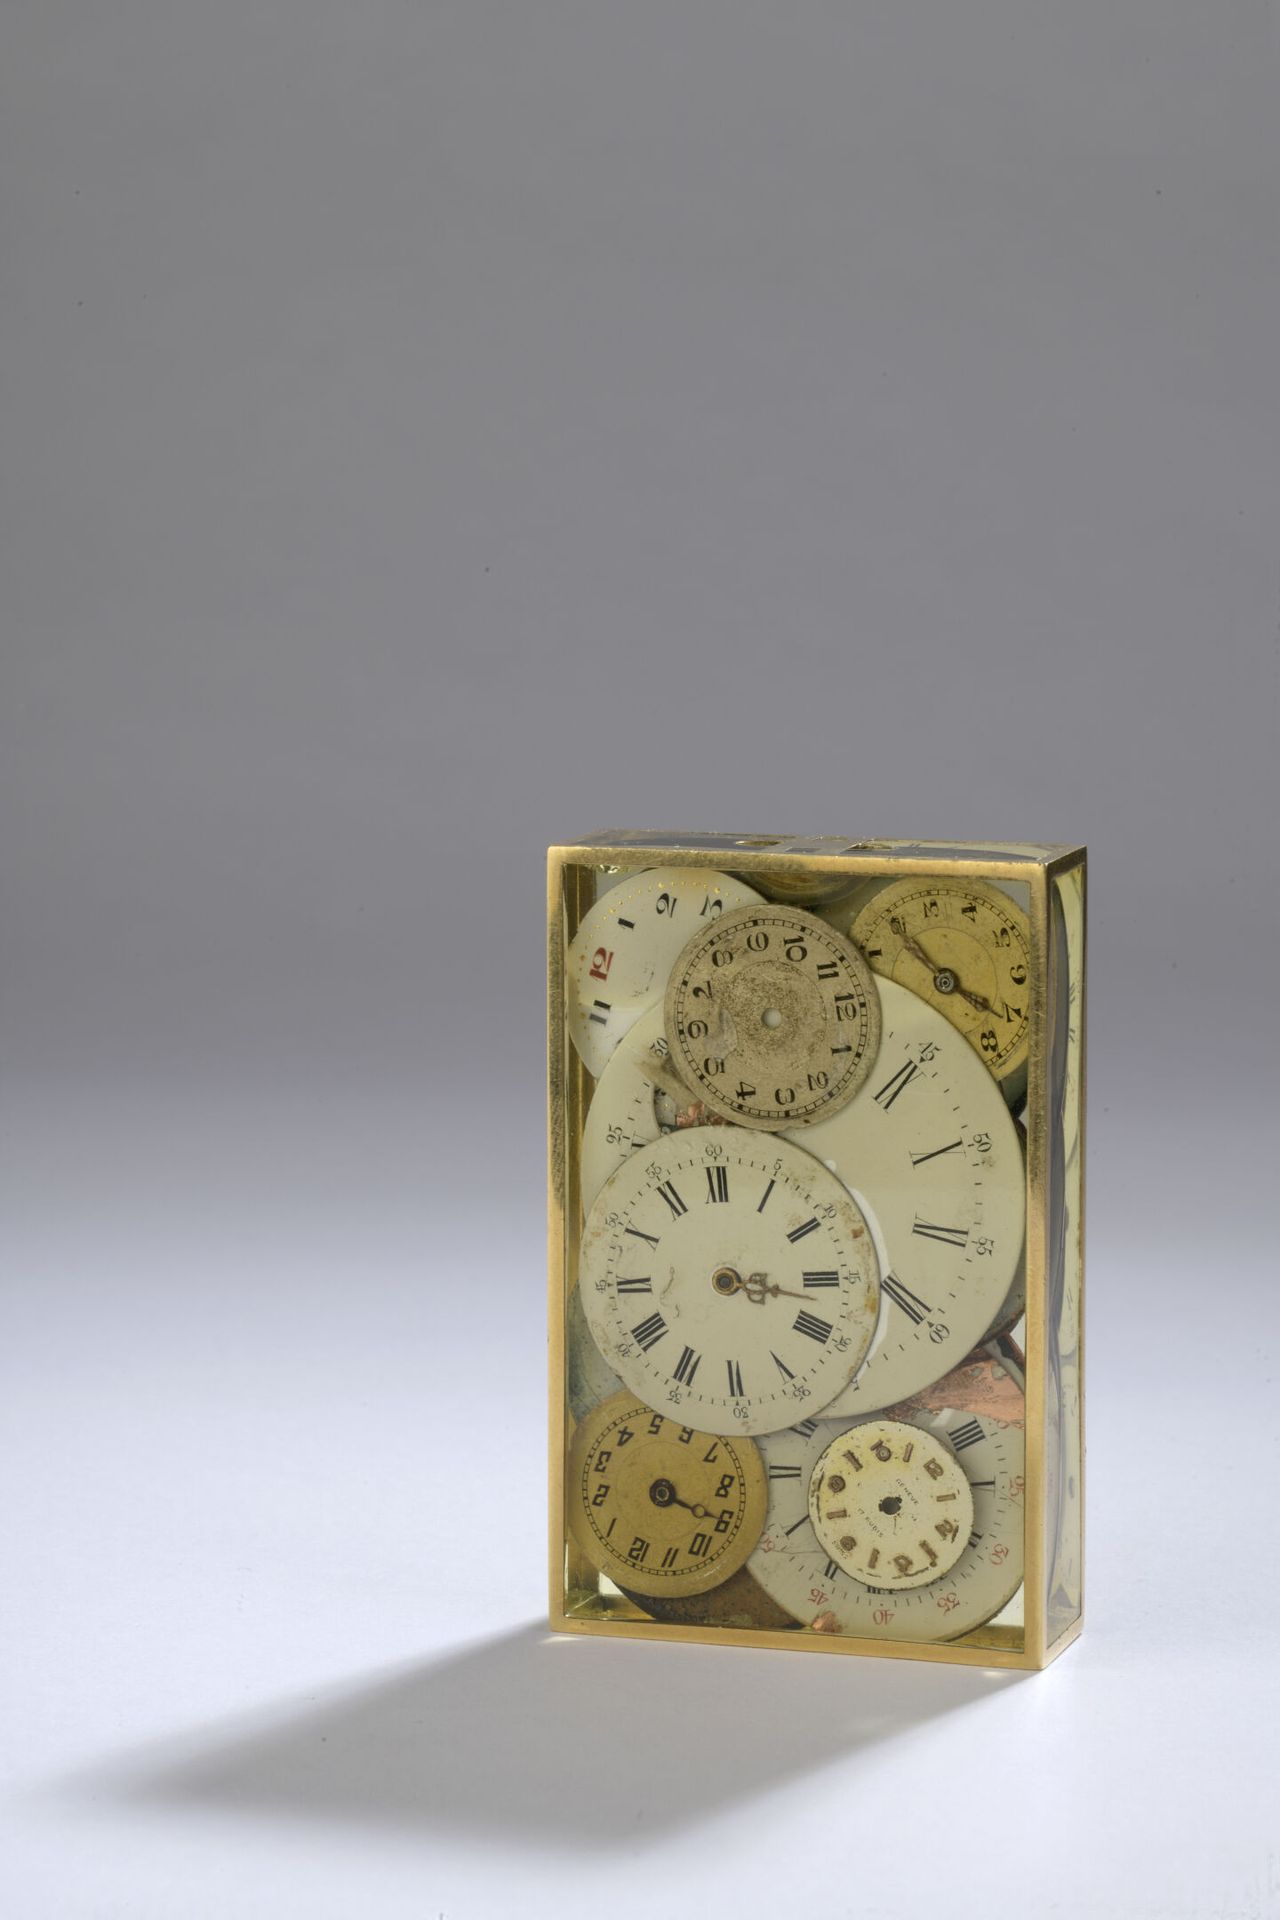 Null ARMAN (1928-2005)

Accumulation/Jewelry

Accumulation of old watch dials in&hellip;